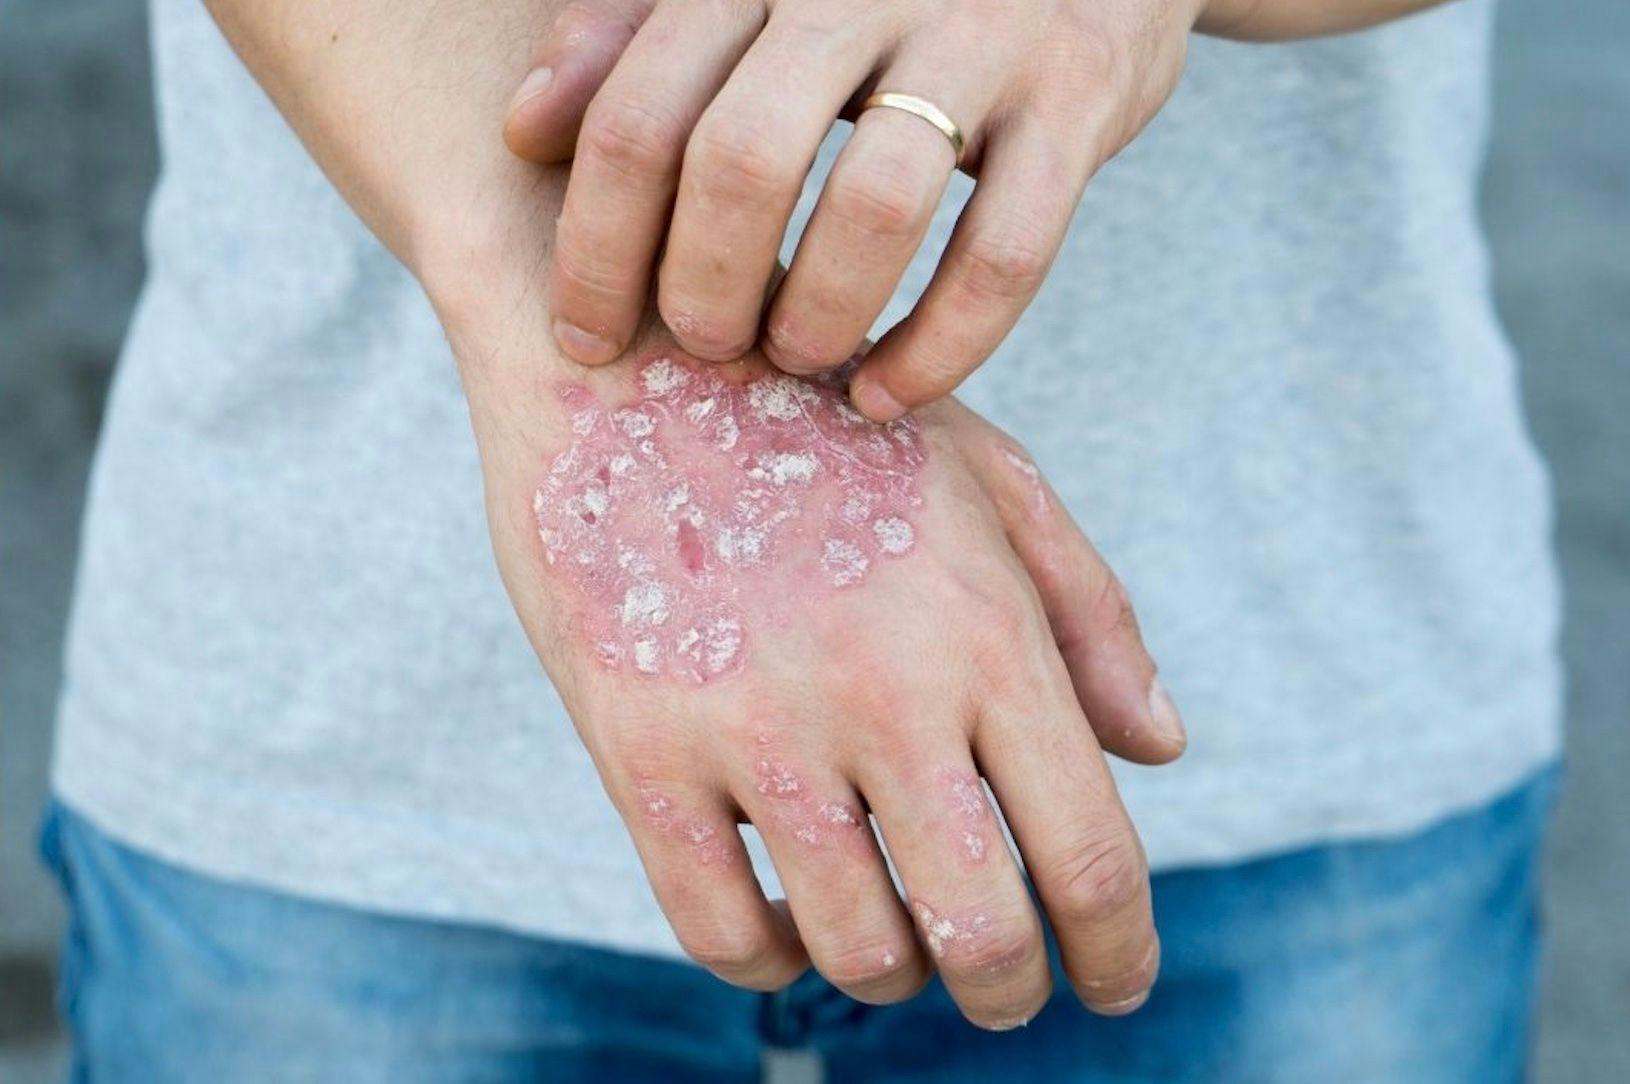 Biologics Offer Great Results in Treating Psoriasis—At a Cost